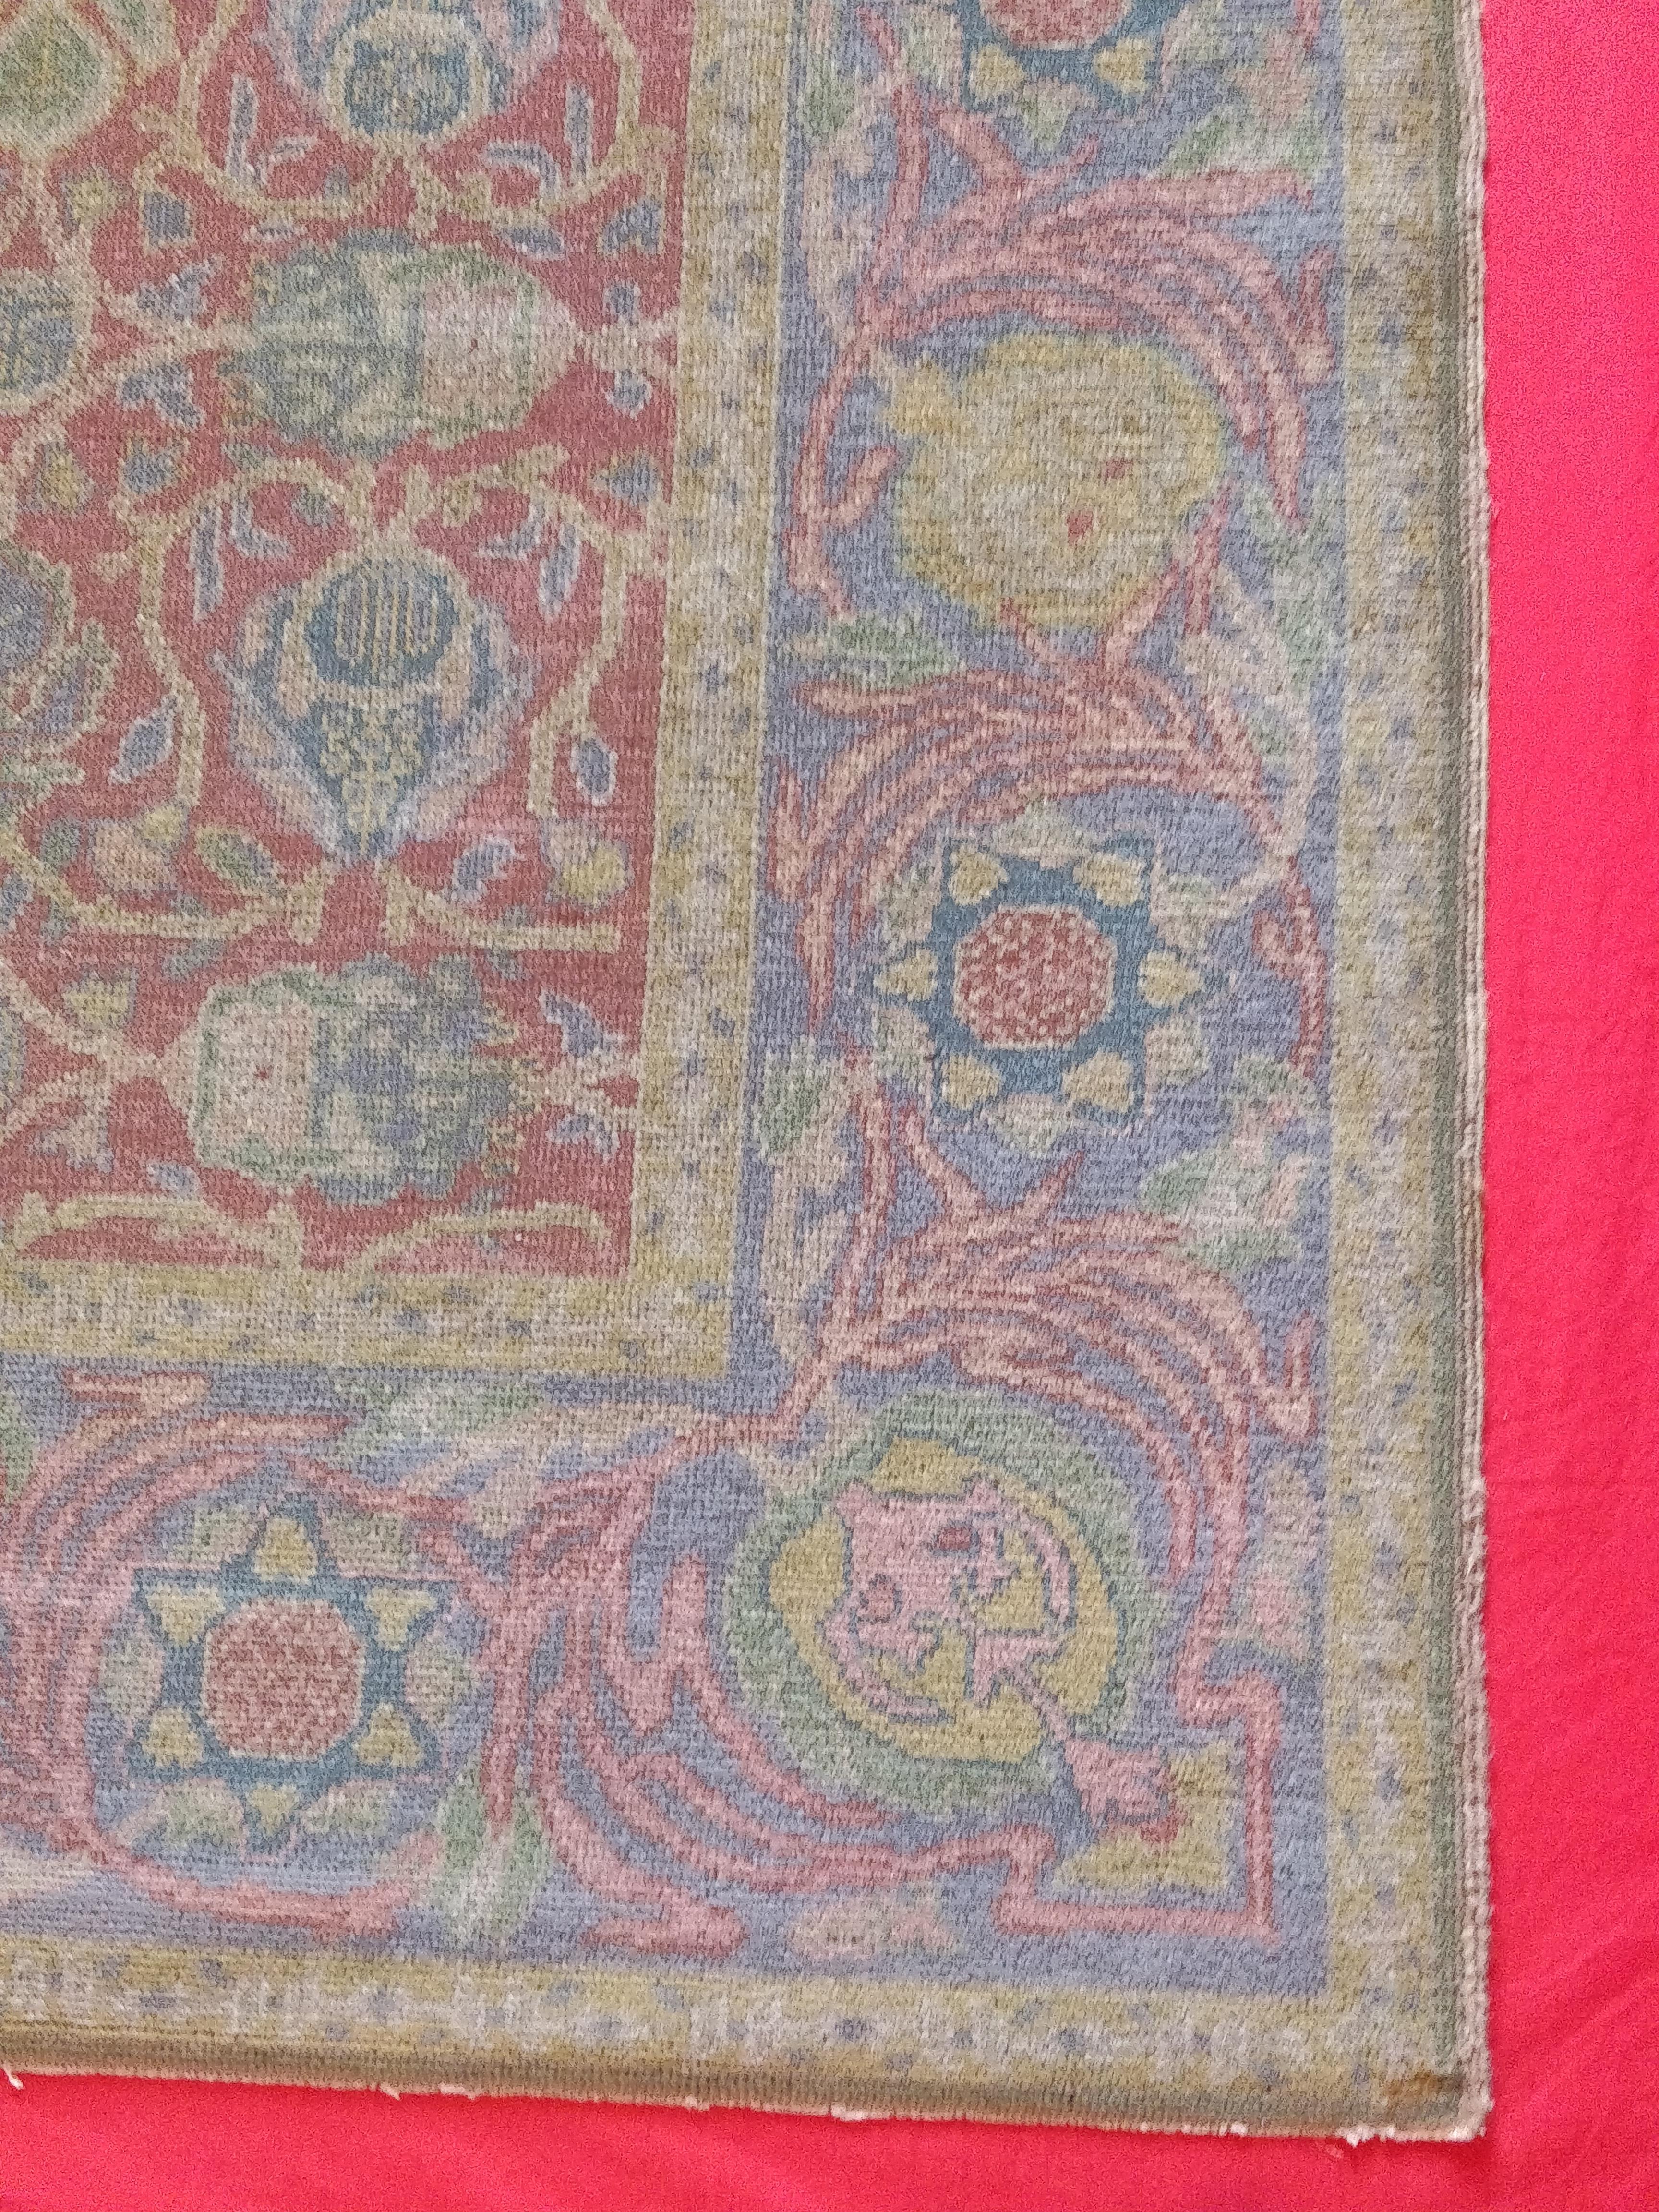 Antique Israel Bezalel Carpet with Judaica Symbols In Good Condition For Sale In Firenze, FI